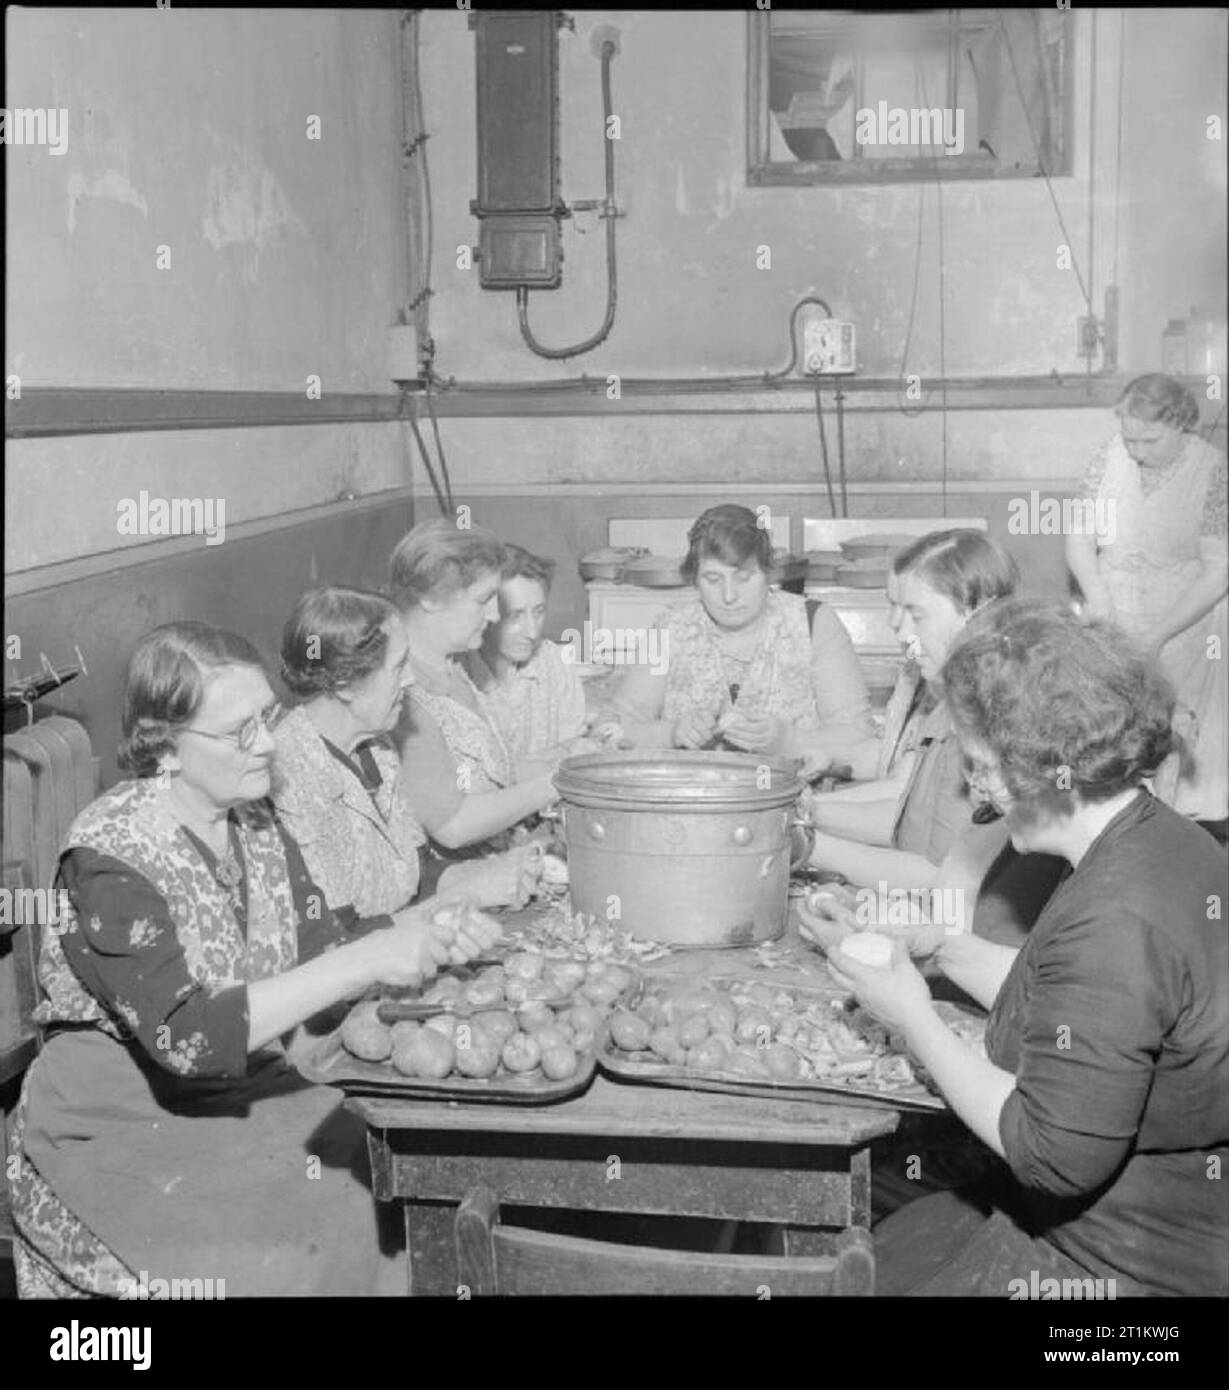 Woolmore Street Restaurant- Eating Out in Wartime London, 1942 Women at work preparing vegetables in the kitchen of the British Restaurant at Woolmore Street. Left to right they are: Mrs F Malyon (aged 59), Mrs C Pude (aged 64, a cigar worker in peacetime), Mrs Florence Skinner, Mrs Davison (once demonstrated cleaning materials), Mrs J Harrop (ran a corn chandler and grocer's store), Doris Prigge (previously in the catering trade), Miss Barkwith, Miss Violet Hancock and Mrs Turley. Another woman can be seen in the background. Stock Photo